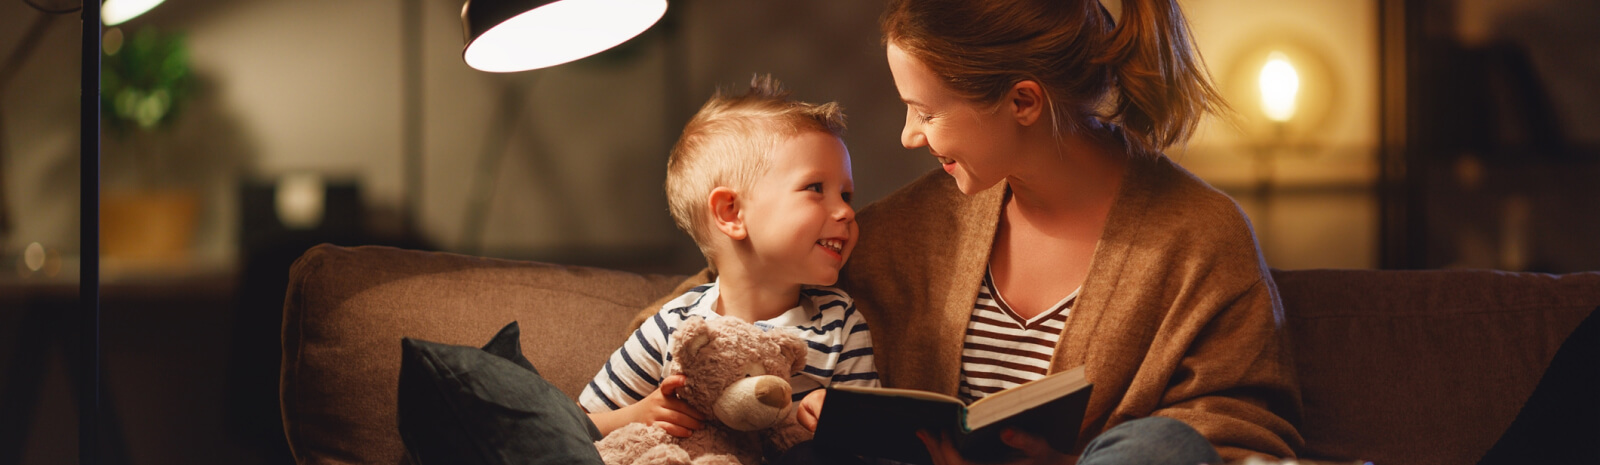 a mom reading a book to a young boy